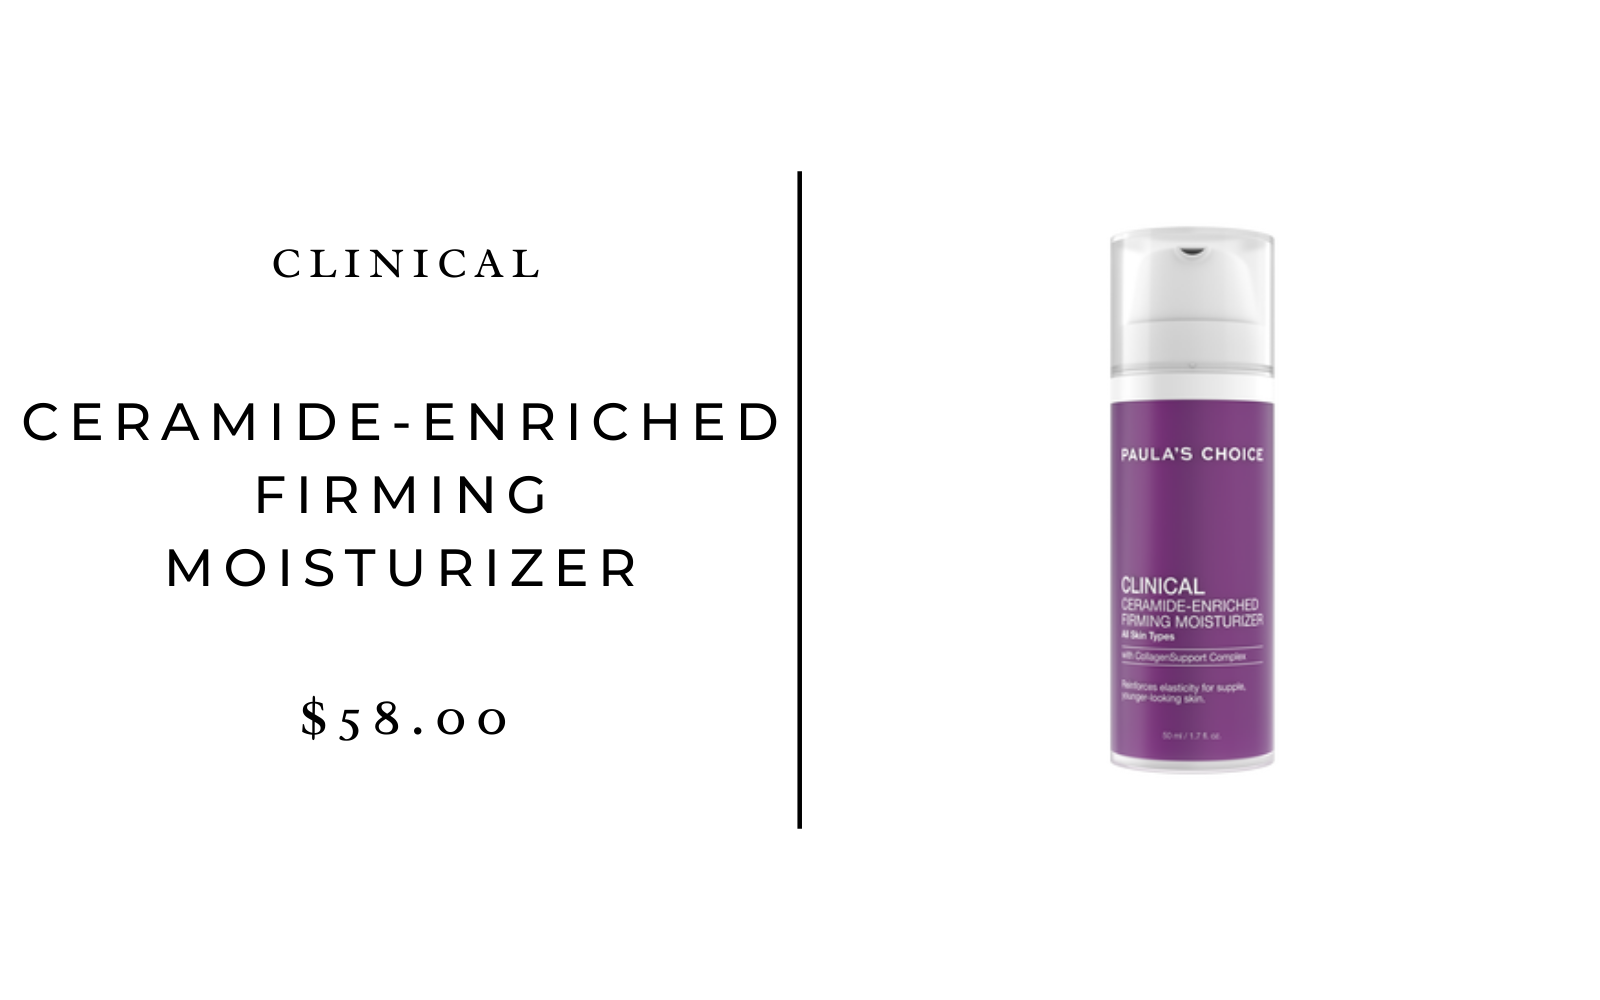 Paula’s Choice Clinical Ceramide-Enriched Firming Moisturizer